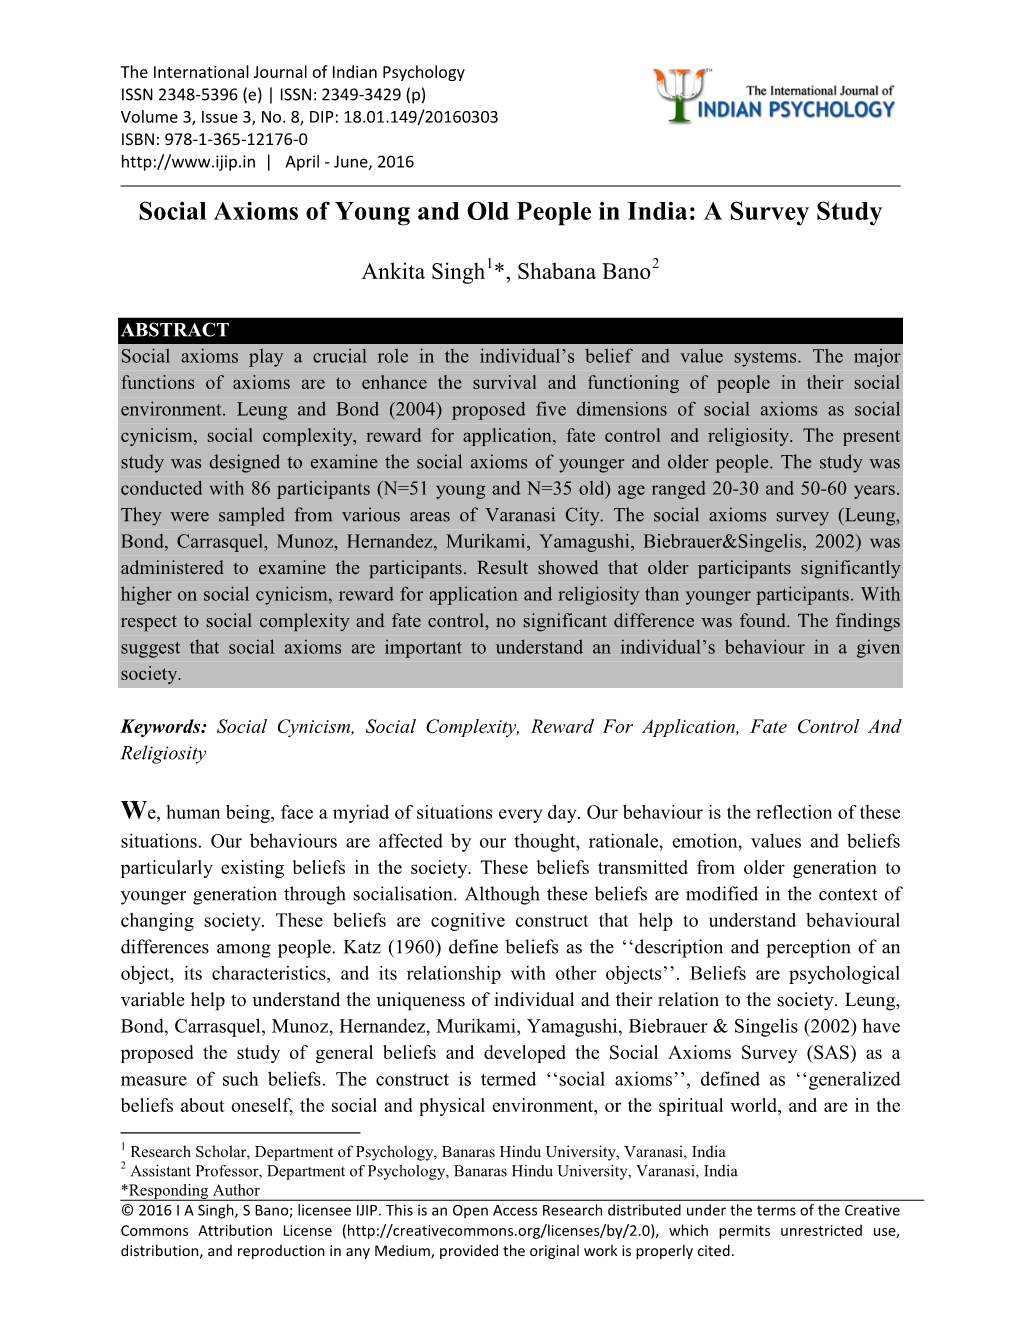 Social Axioms of Young and Old People in India: a Survey Study